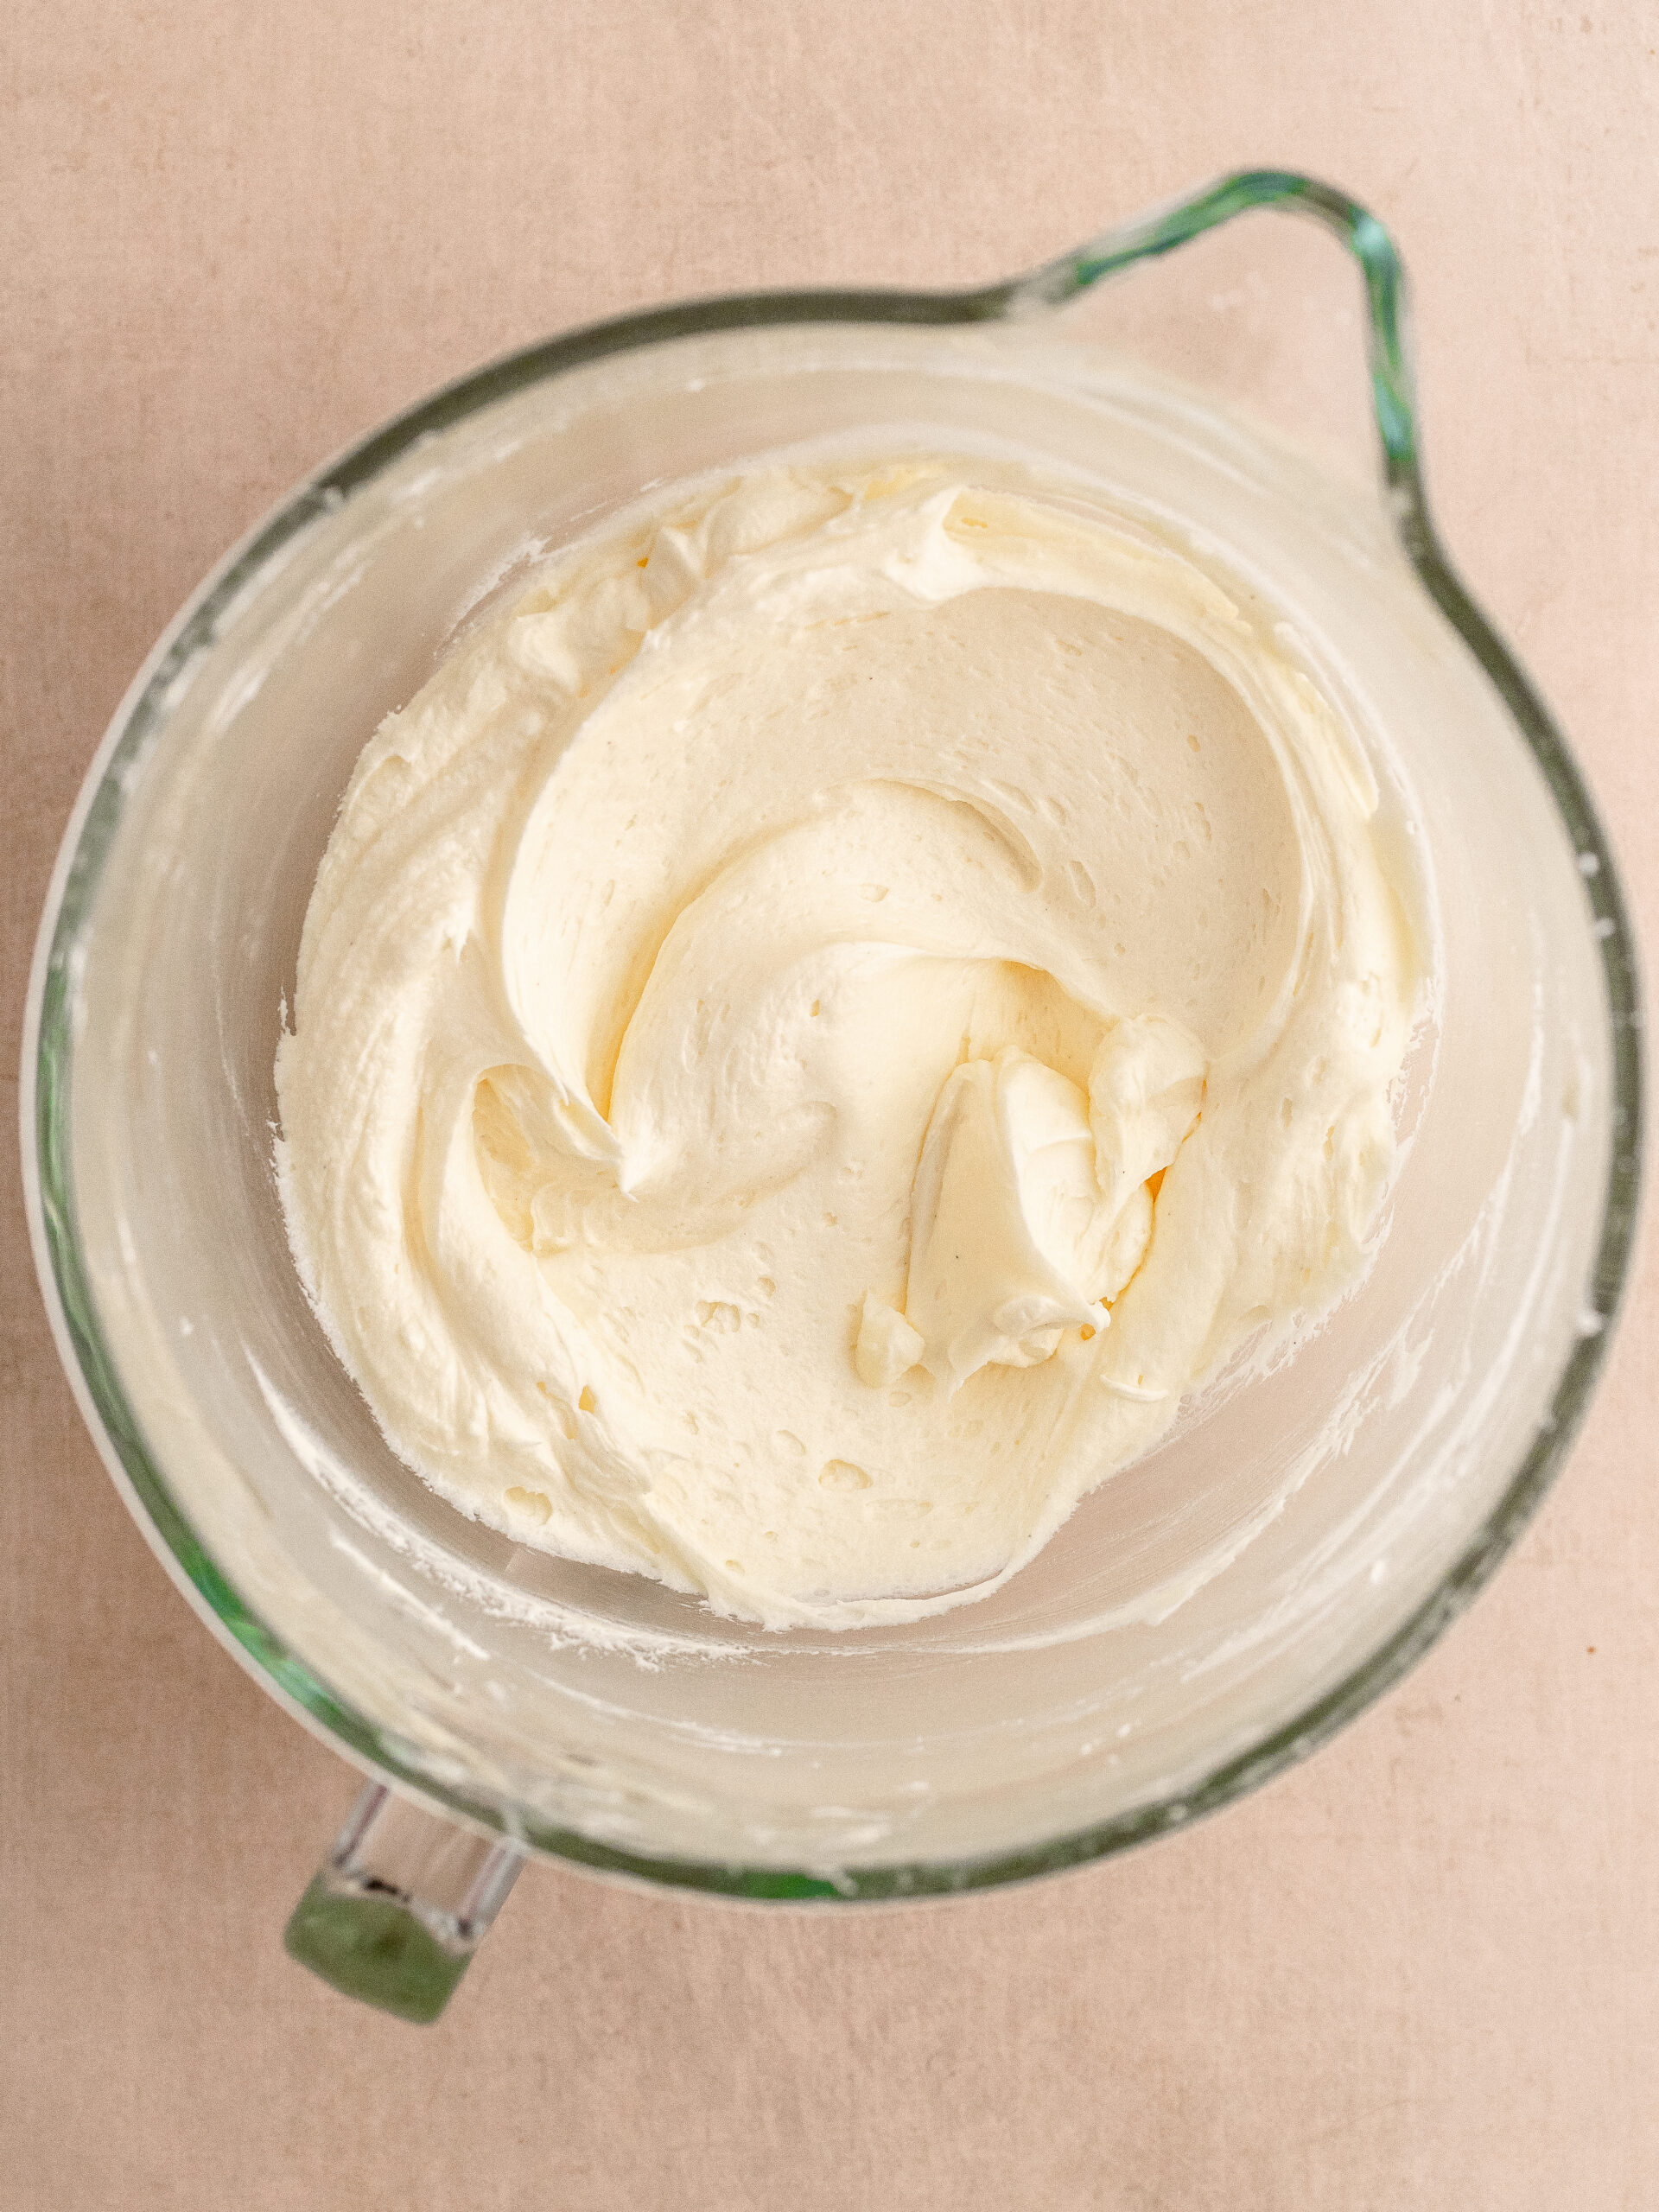 Step 4: Make the cream cheese frosting.